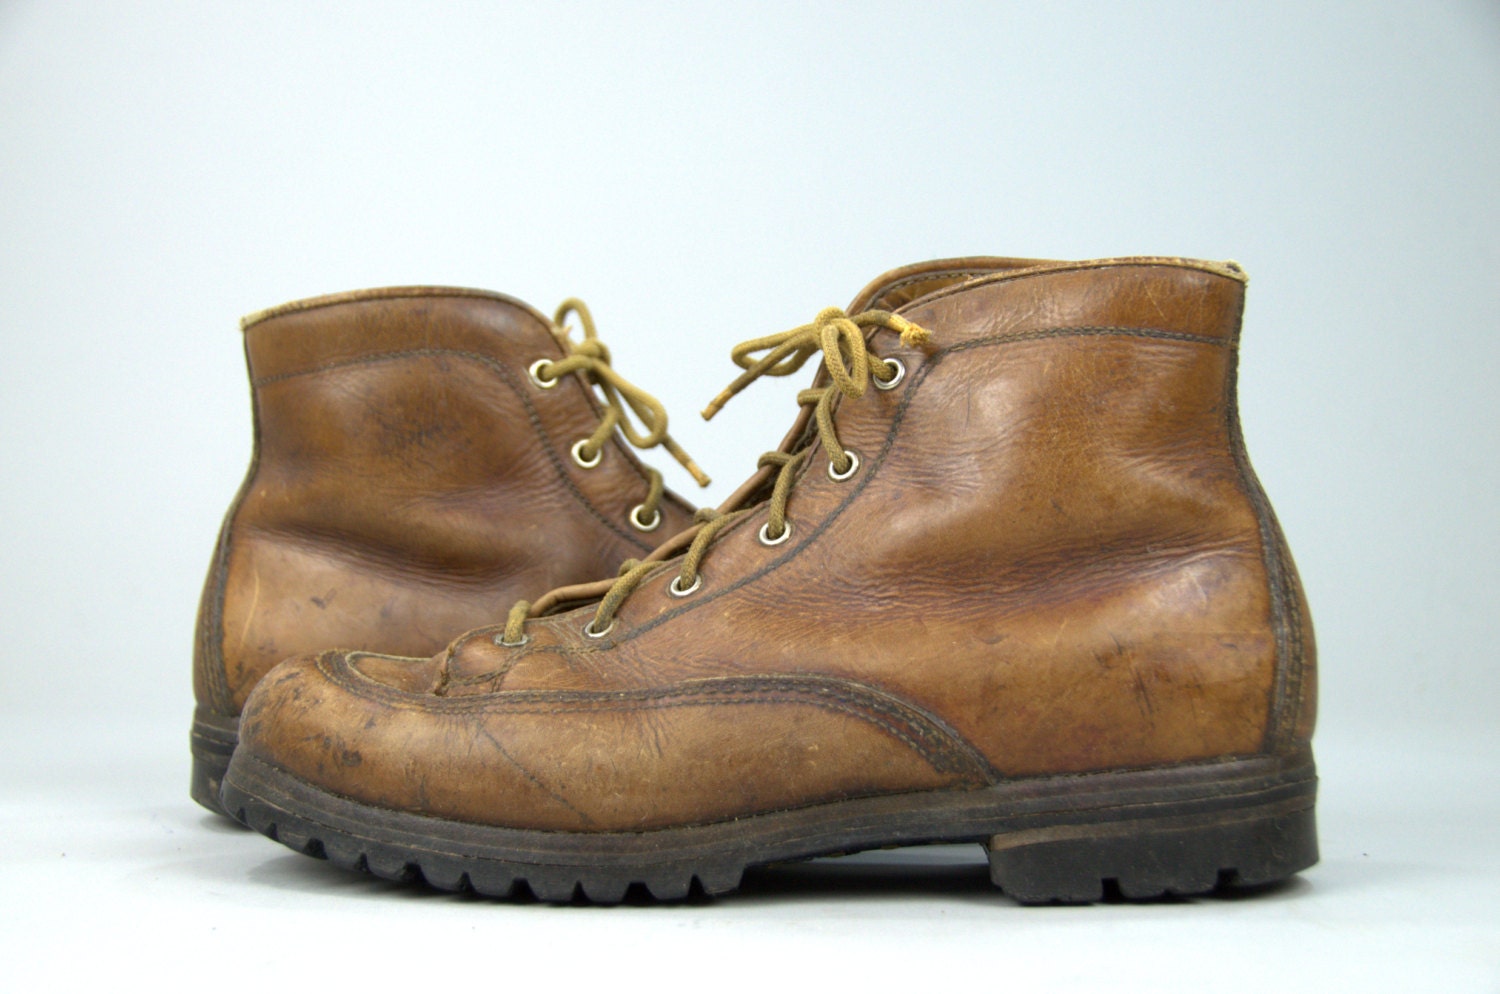 70s Italian Hiking Boots Heavy Duty Leather Mountaineer Lace